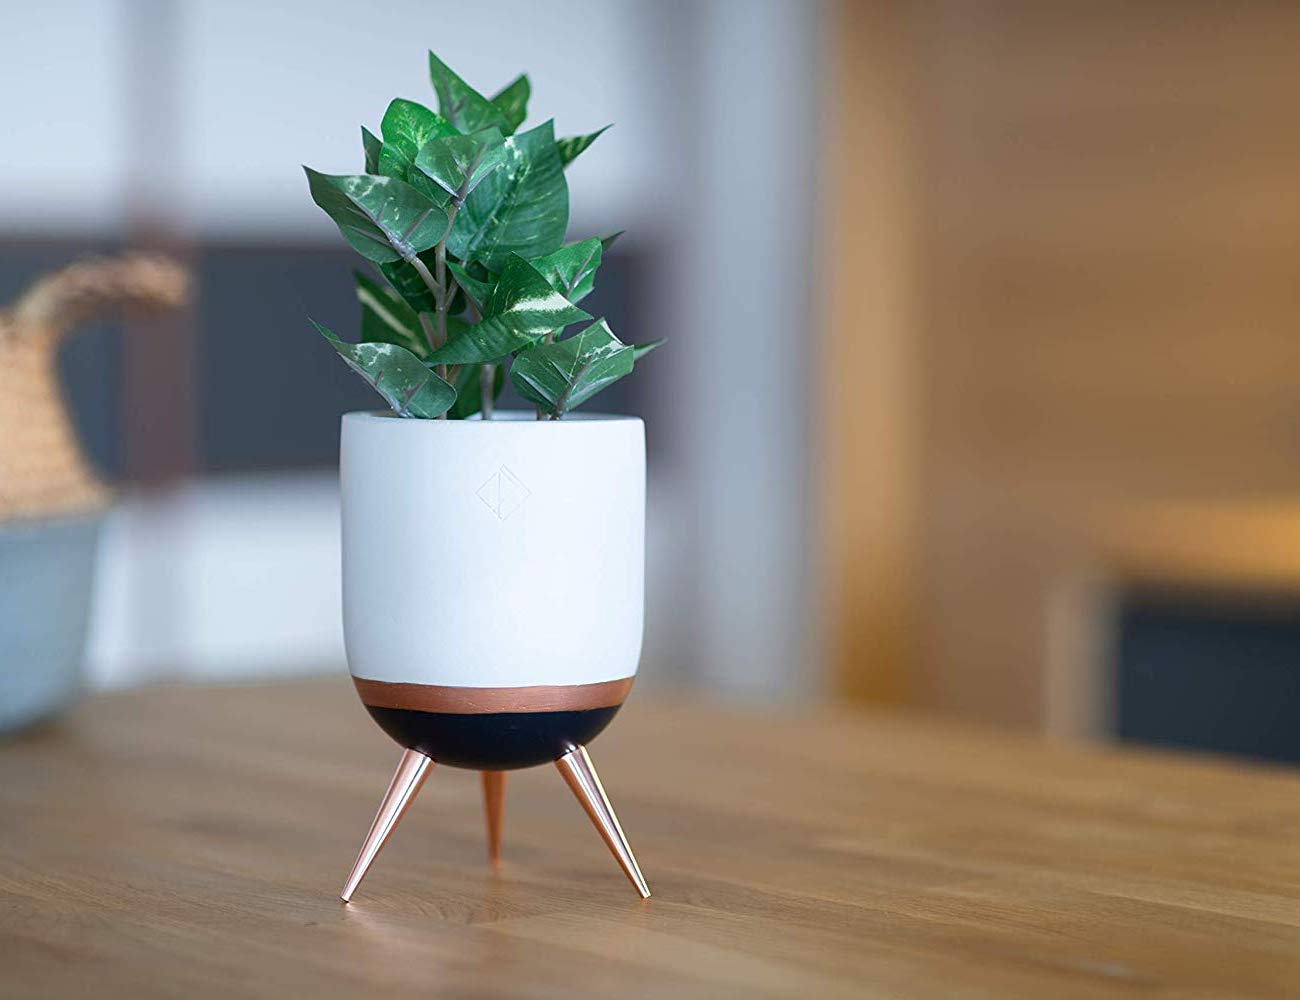 PERNER Tri-Legged Ceramic Flower Pot adds greenery to your space